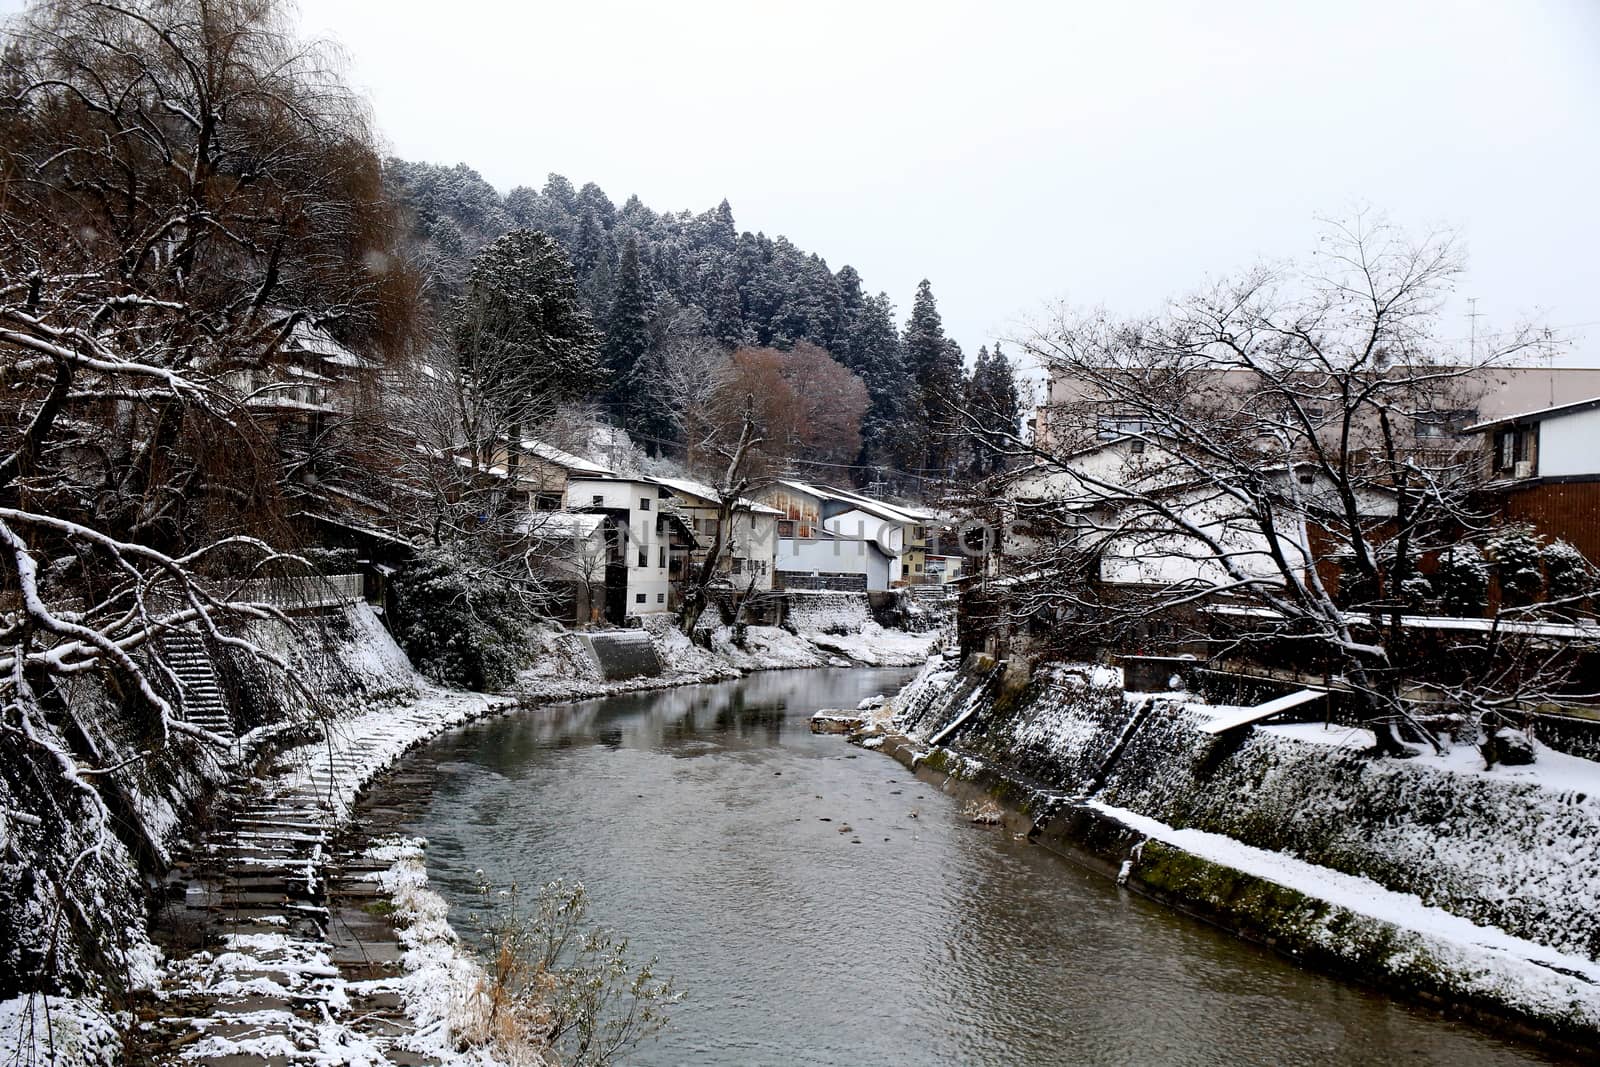 The river through Takayama by hanstography